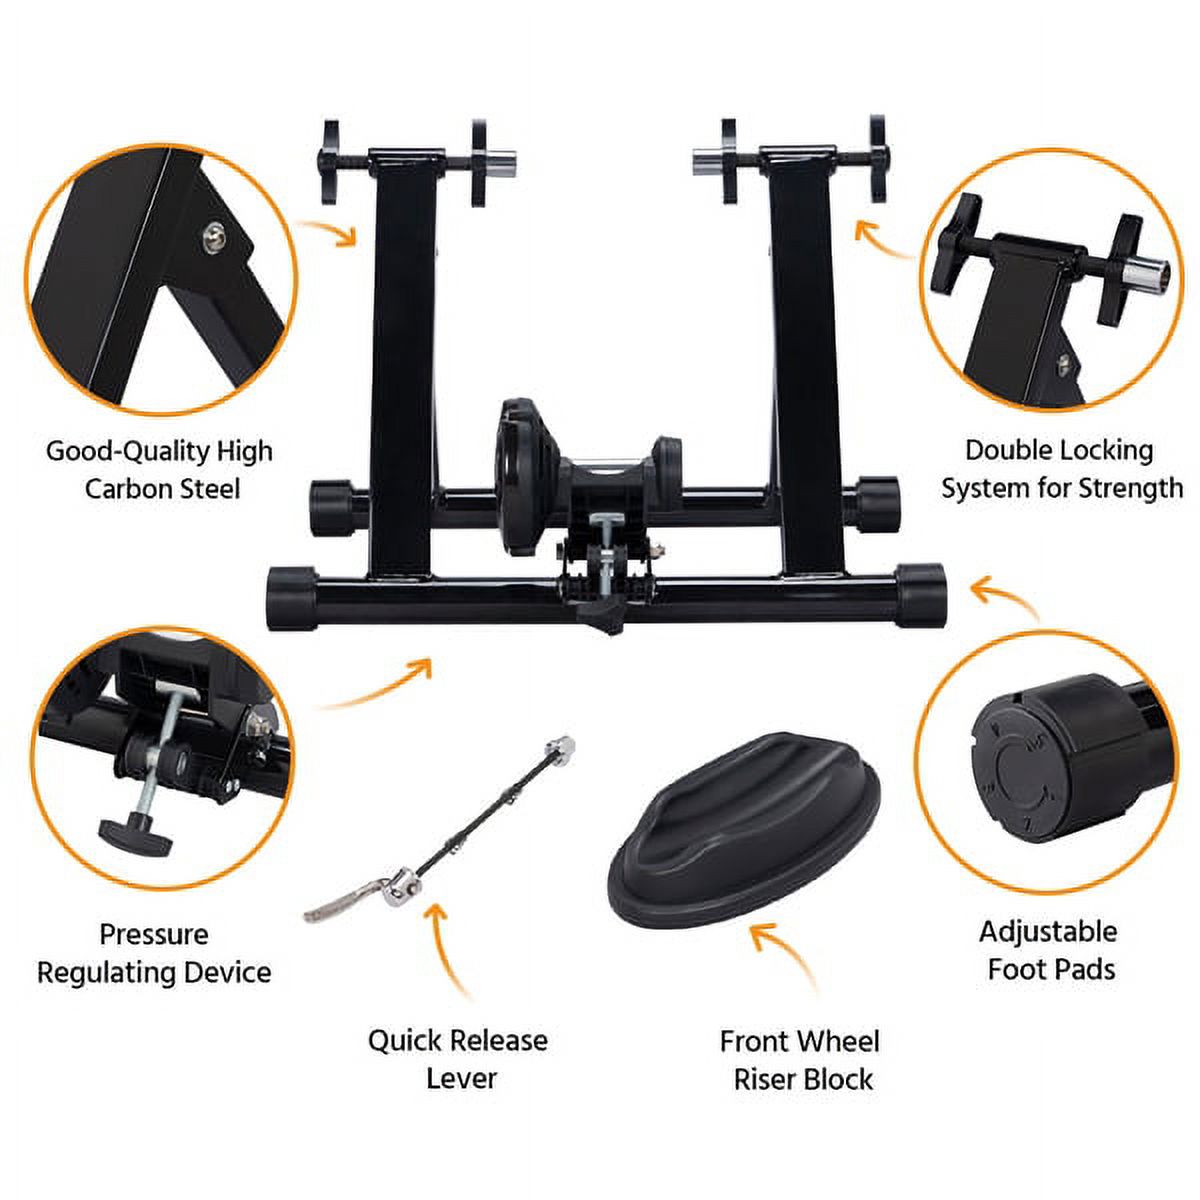 Topeakmart Foldable Indoor Bike Trainer Magnetic Cycle Trainer Stand with Front Wheel Support and Quick Release Skewer Black - image 5 of 14